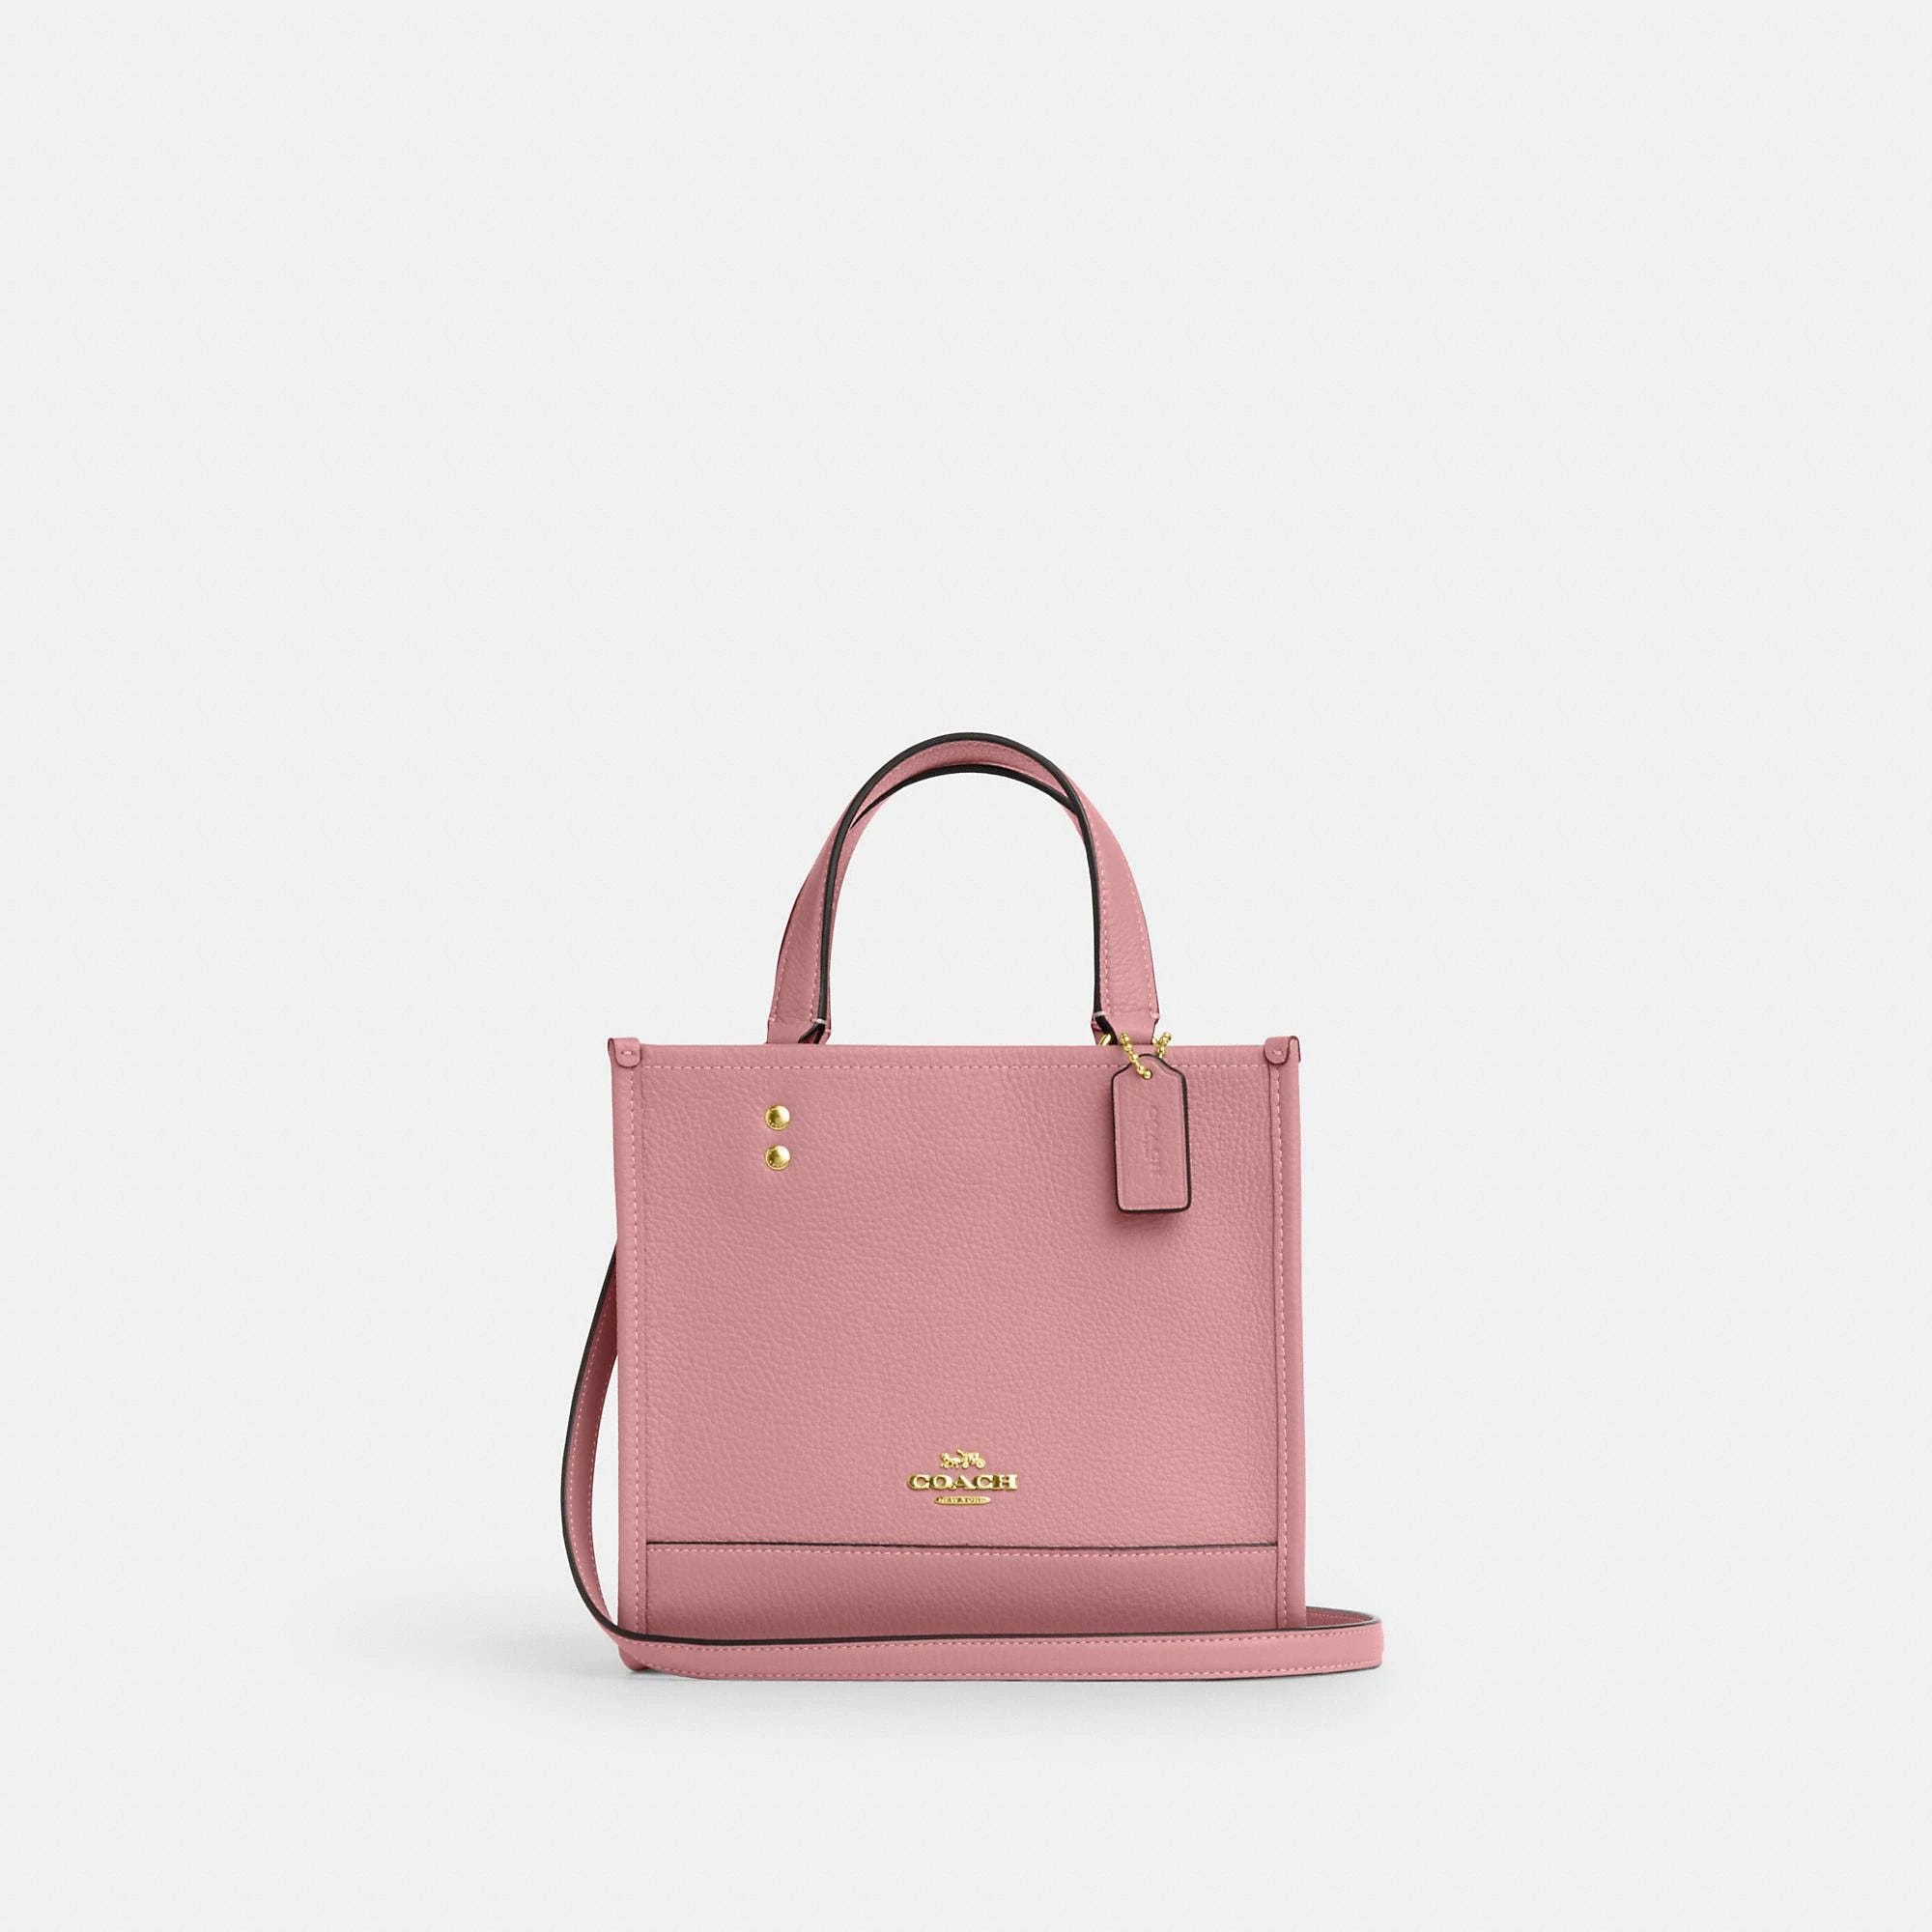 Pink Pebble Leather Tote Bag by Coach Outlet | Image